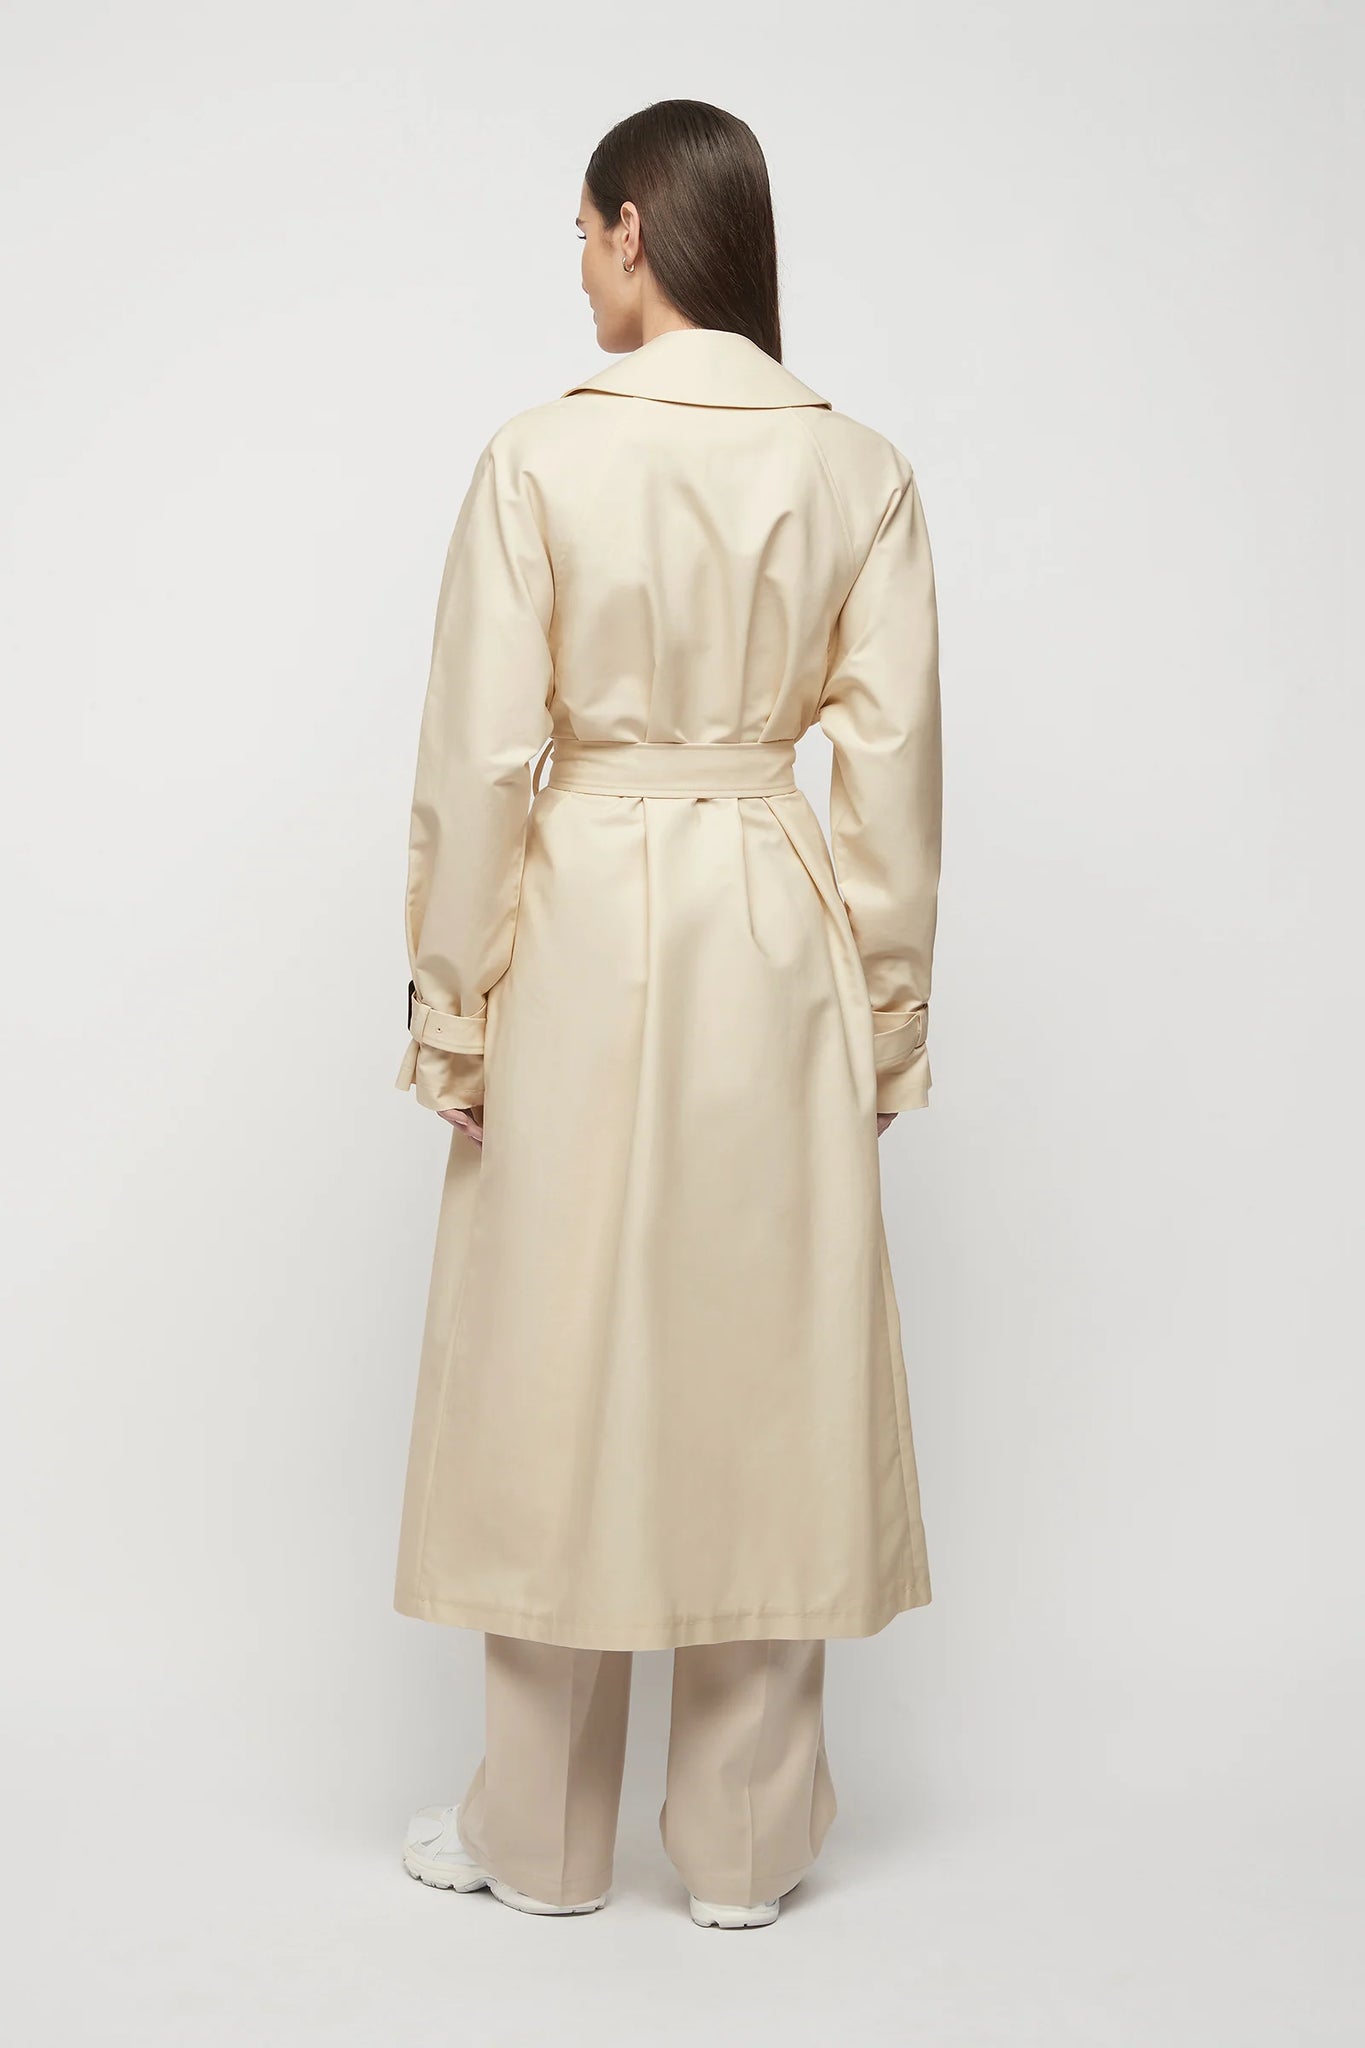 Friend of Audrey Browne Oversized Trench Coat - Bone